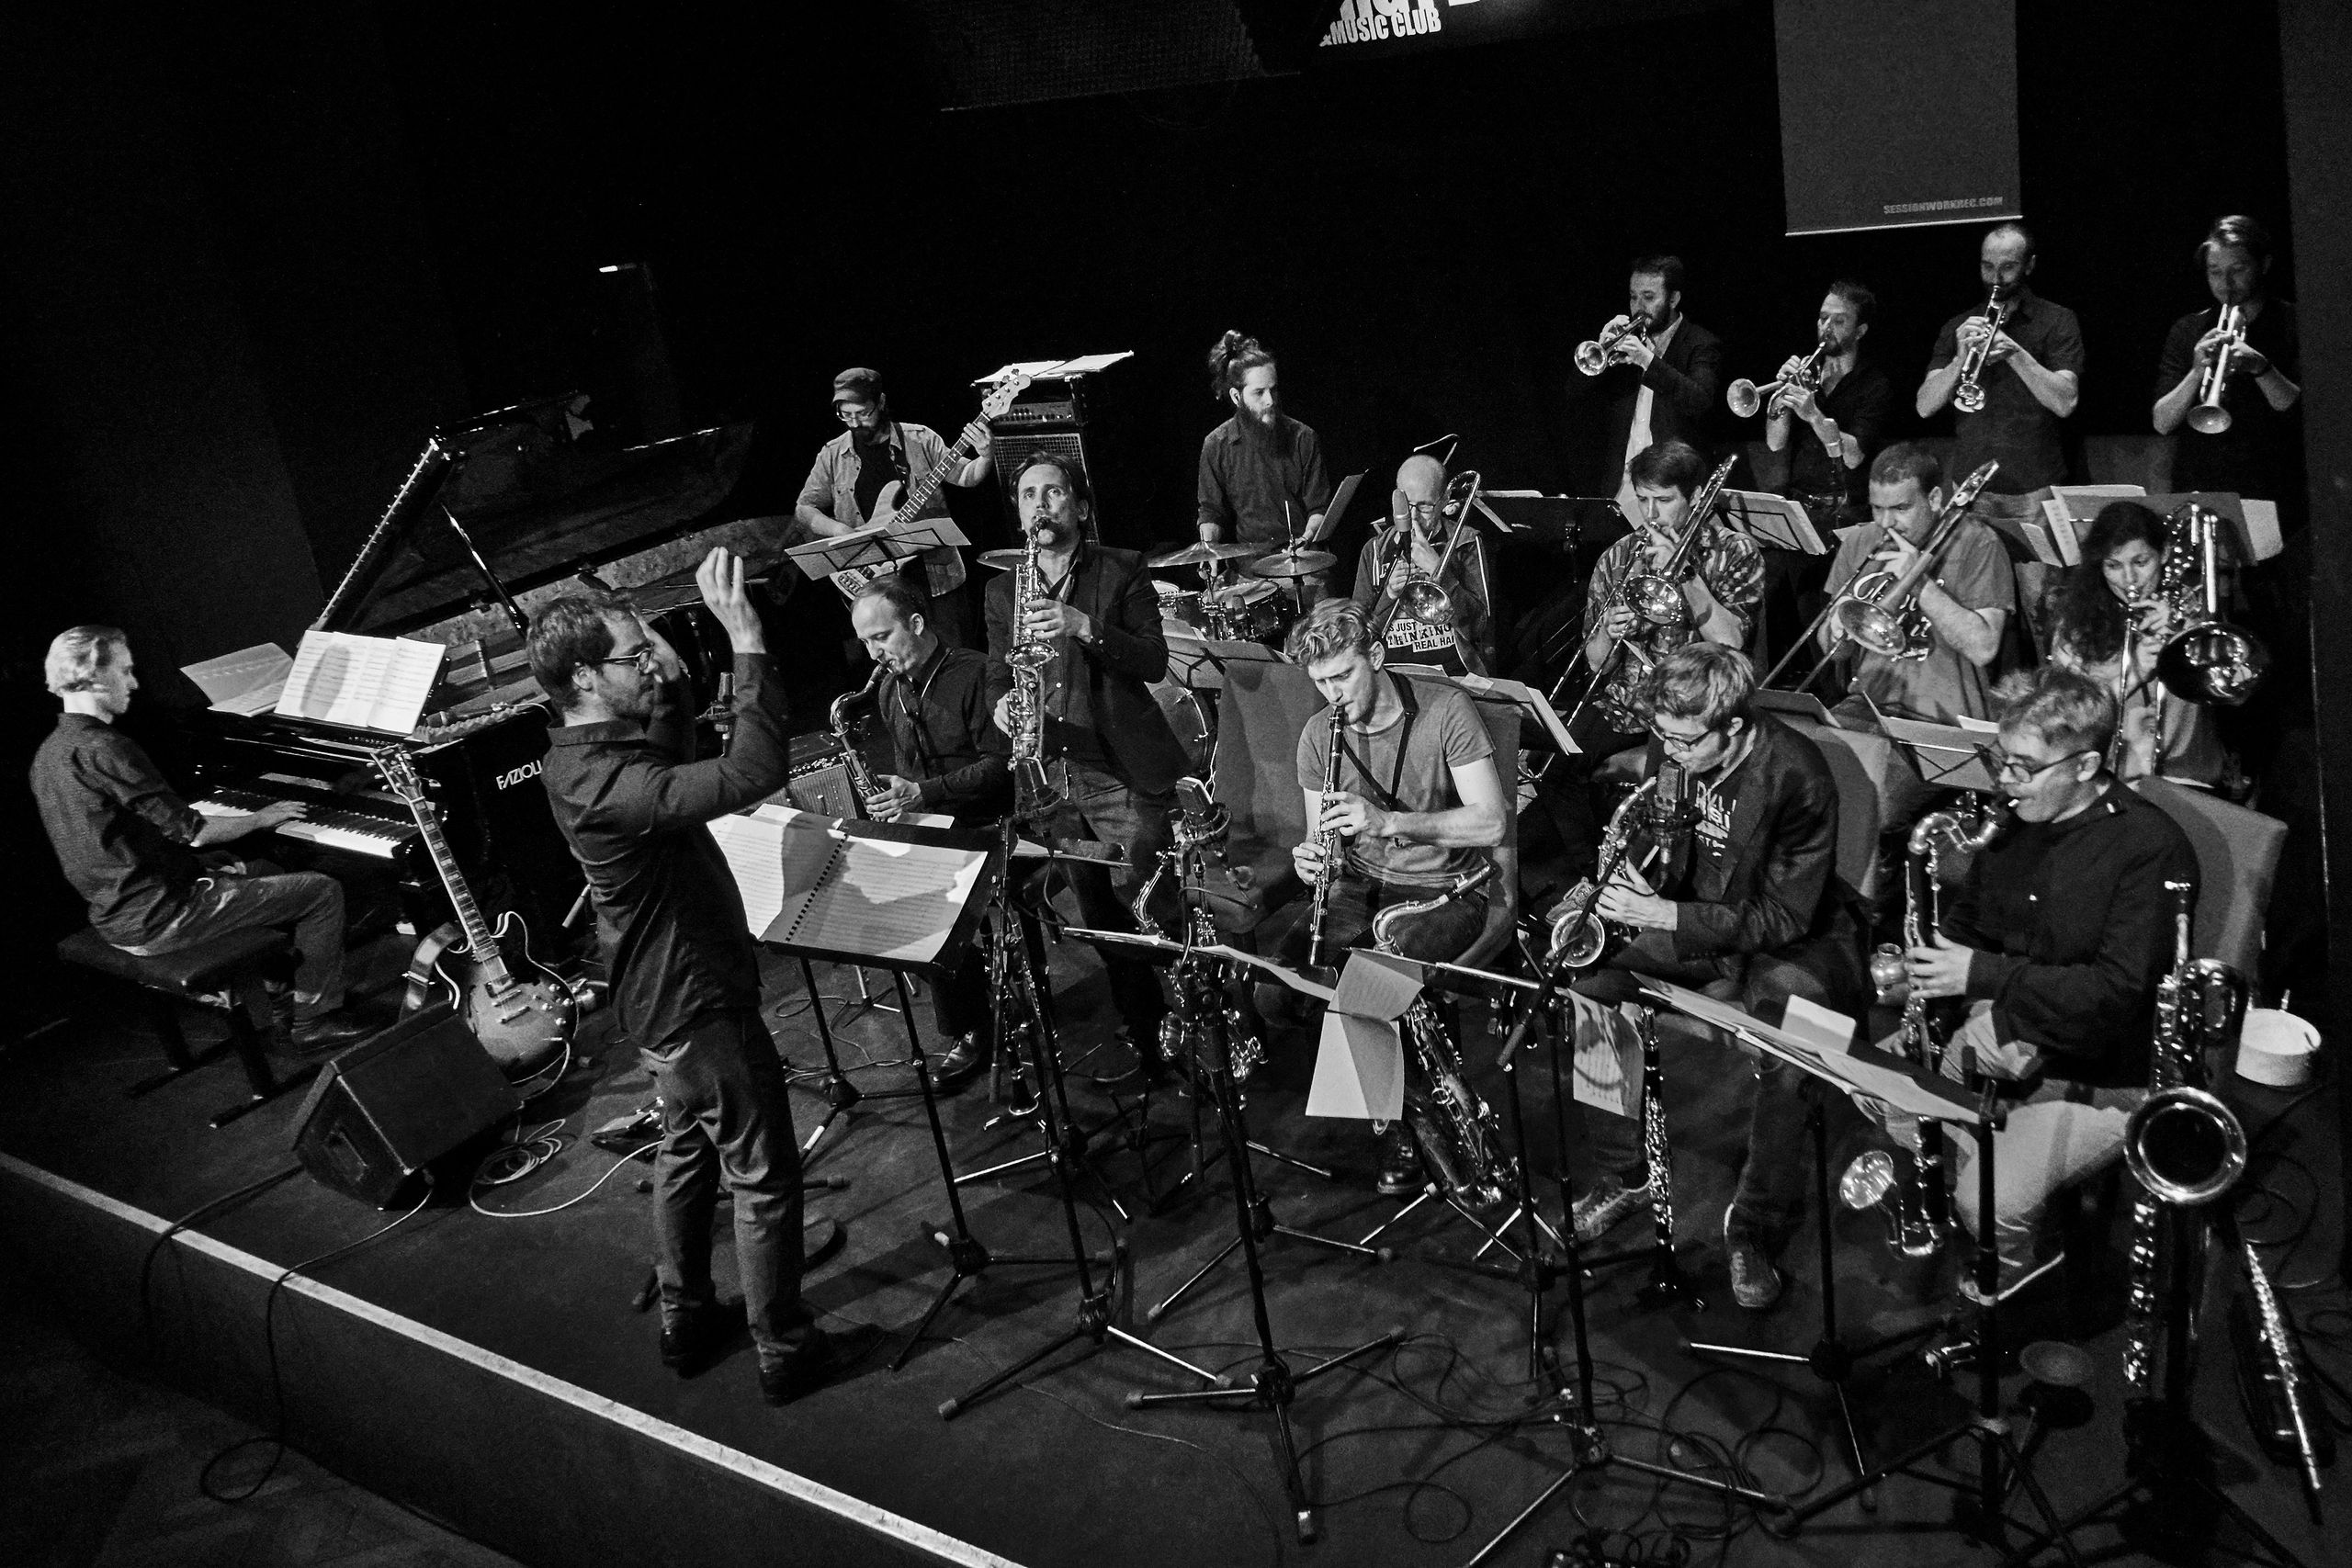 Emiliano Sampaio Jazz Orchestra
The ESJO has two versions, the European and the Brazilian big bands. 